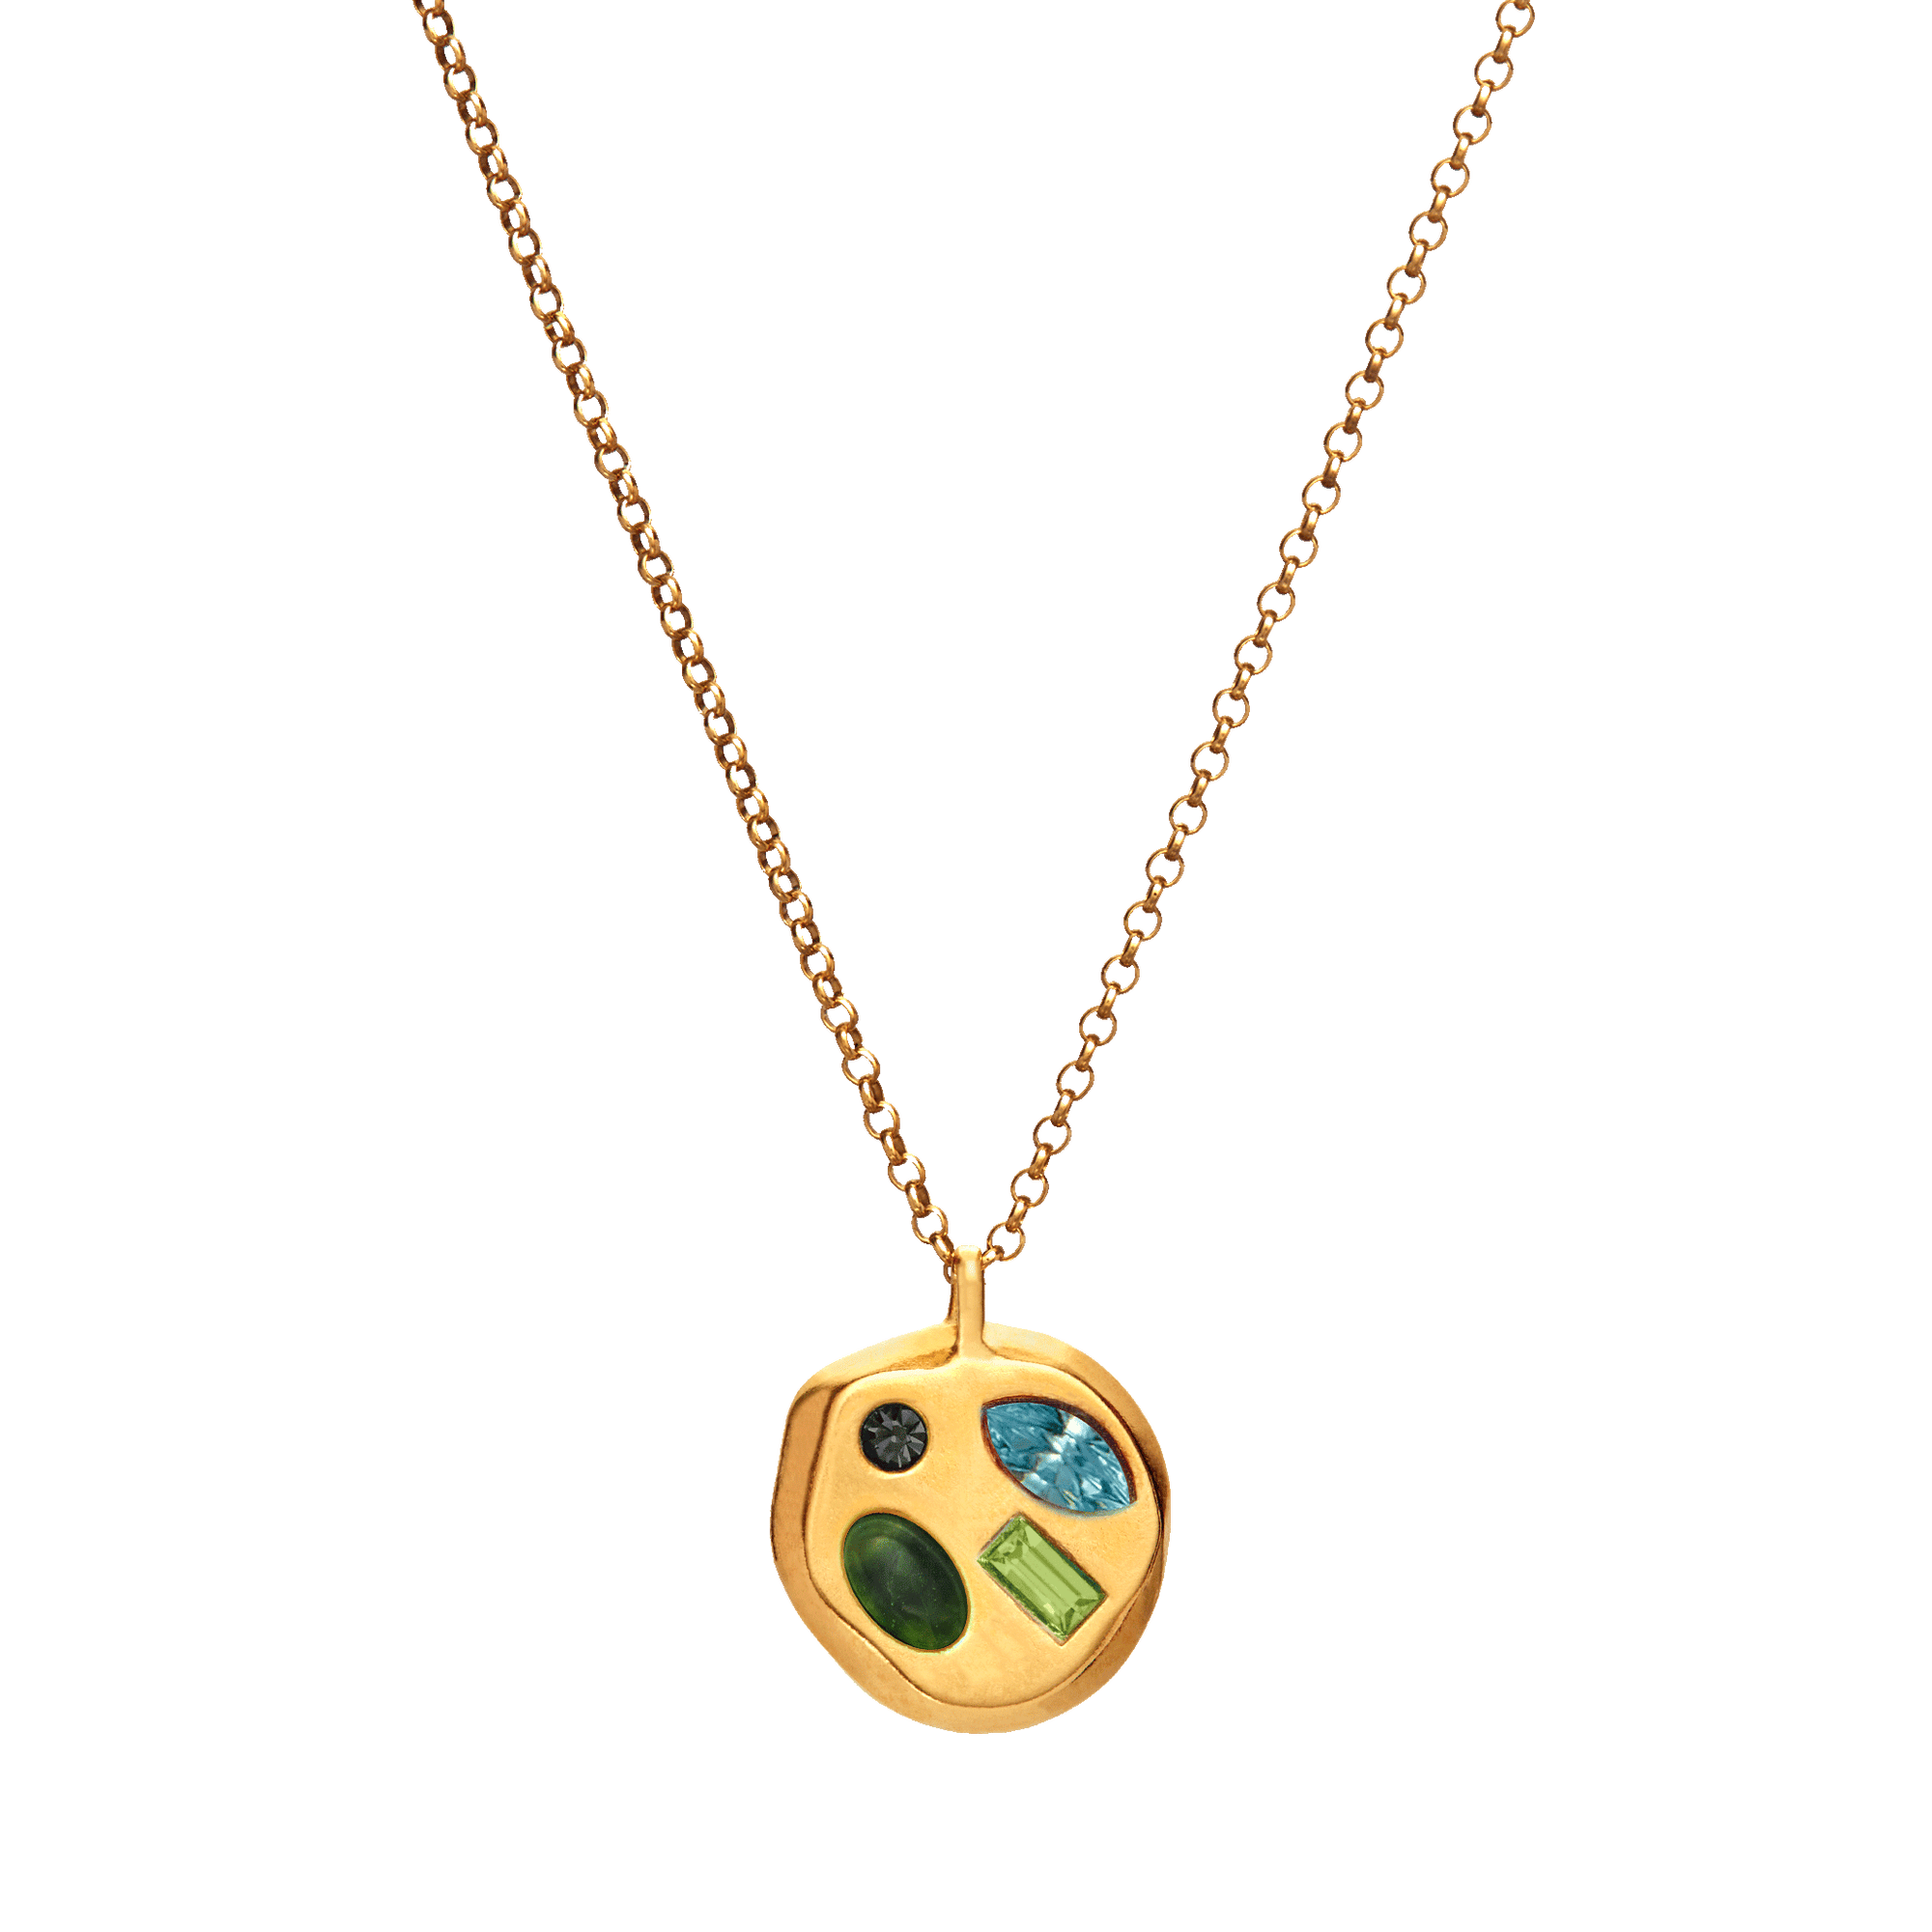 The March Third Pendant